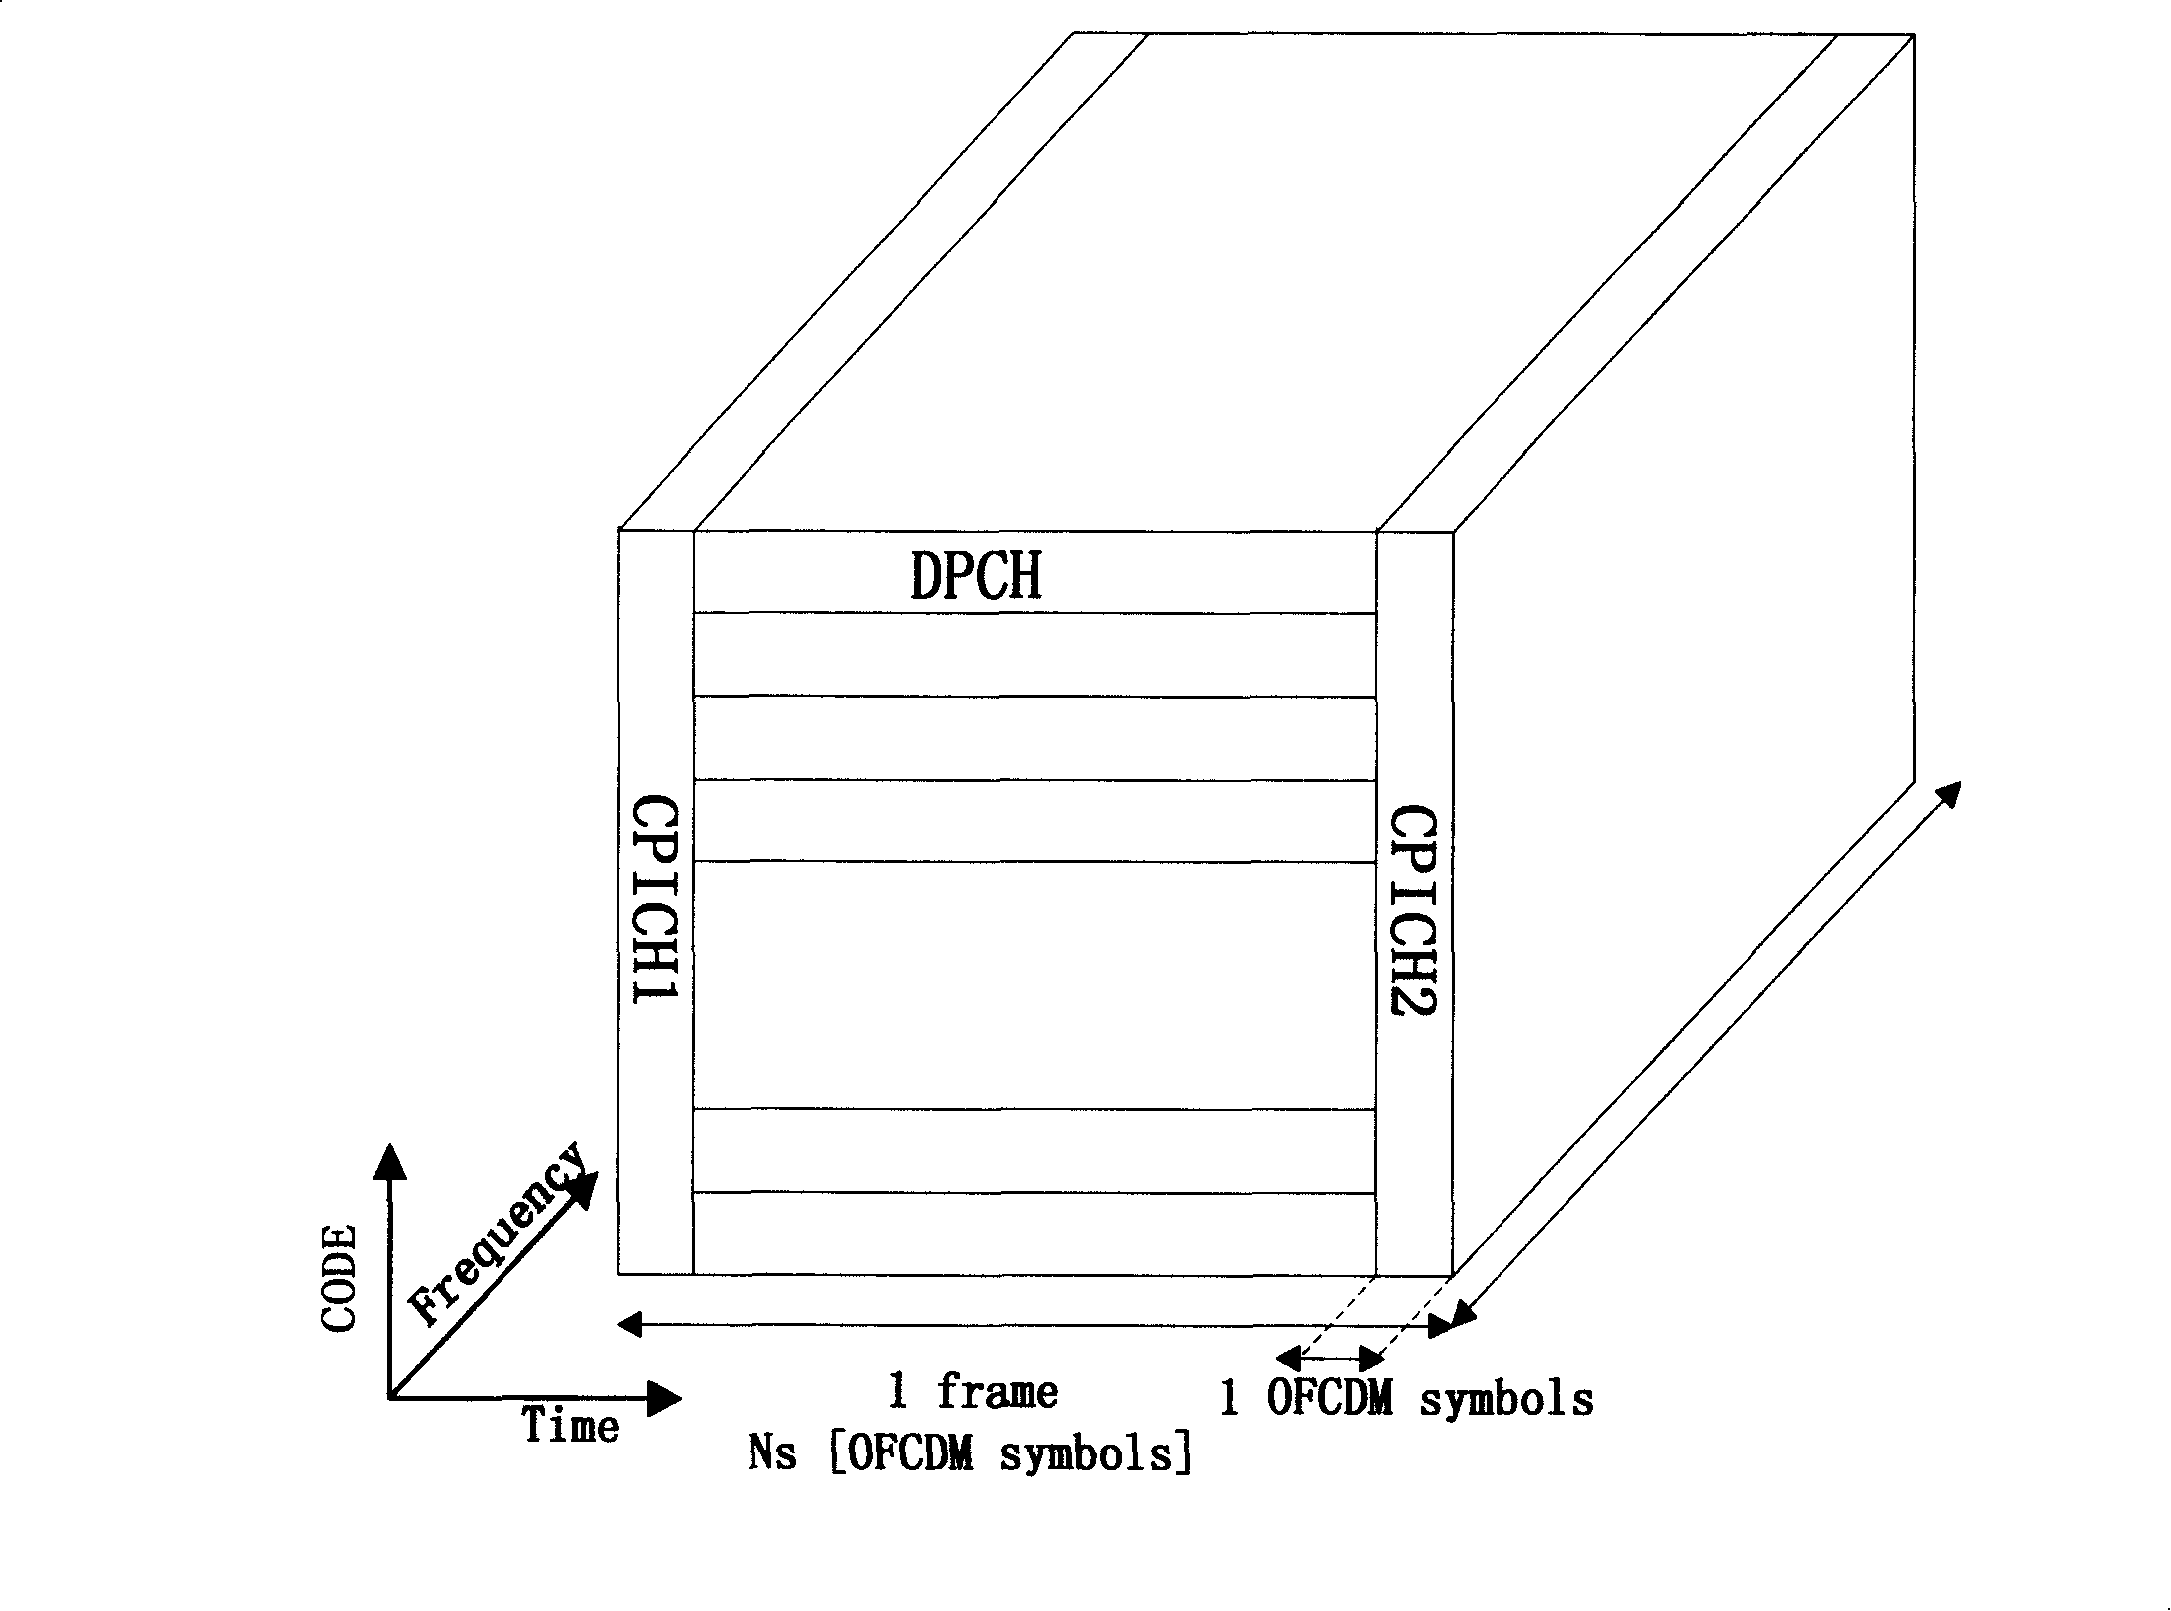 Cell searching synchronization method base on time domain processing